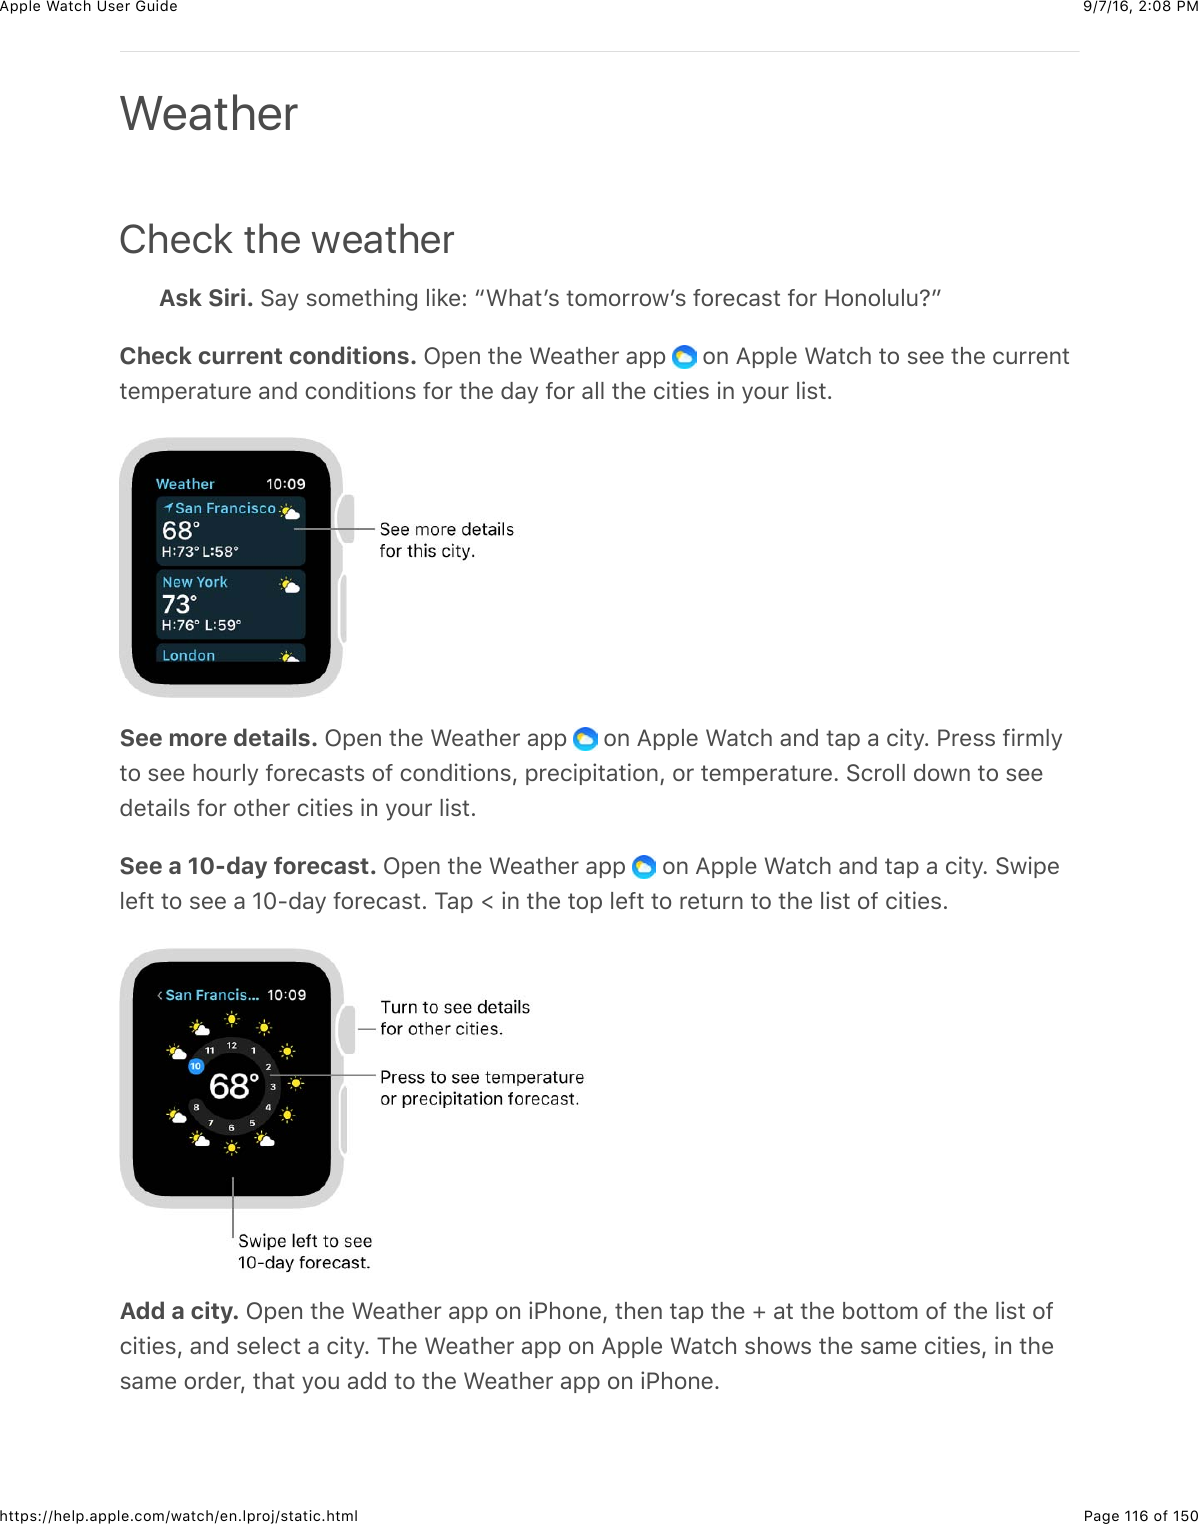 9/7/16, 2)08 PMApple Watch User GuidePage 116 of 150https://help.apple.com/watch/en.lproj/static.htmlCheck the weatherAsk Siri. 6&apos;/&amp;$#5%3)+,-&amp;&quot;+8%e&amp;a&gt;)&apos;3W$&amp;3#5#**#7W$&amp;@#*%(&apos;$3&amp;@#*&amp;9#,#&quot;4&quot;4:bCheck current conditions. L2%,&amp;3)%&amp;&gt;%&apos;3)%*&amp;&apos;22&amp; &amp;#,&amp;=22&quot;%&amp;&gt;&apos;3()&amp;3#&amp;$%%&amp;3)%&amp;(4**%,33%52%*&apos;34*%&amp;&apos;,0&amp;(#,0+3+#,$&amp;@#*&amp;3)%&amp;0&apos;/&amp;@#*&amp;&apos;&quot;&quot;&amp;3)%&amp;(+3+%$&amp;+,&amp;/#4*&amp;&quot;+$3CSee more details. L2%,&amp;3)%&amp;&gt;%&apos;3)%*&amp;&apos;22&amp; &amp;#,&amp;=22&quot;%&amp;&gt;&apos;3()&amp;&apos;,0&amp;3&apos;2&amp;&apos;&amp;(+3/C&amp;G*%$$&amp;@+*5&quot;/3#&amp;$%%&amp;)#4*&quot;/&amp;@#*%(&apos;$3$&amp;#@&amp;(#,0+3+#,$J&amp;2*%(+2+3&apos;3+#,J&amp;#*&amp;3%52%*&apos;34*%C&amp;6(*#&quot;&quot;&amp;0#7,&amp;3#&amp;$%%0%3&apos;+&quot;$&amp;@#*&amp;#3)%*&amp;(+3+%$&amp;+,&amp;/#4*&amp;&quot;+$3CSee a 10-day forecast. L2%,&amp;3)%&amp;&gt;%&apos;3)%*&amp;&apos;22&amp; &amp;#,&amp;=22&quot;%&amp;&gt;&apos;3()&amp;&apos;,0&amp;3&apos;2&amp;&apos;&amp;(+3/C&amp;67+2%&quot;%@3&amp;3#&amp;$%%&amp;&apos;&amp;]^?0&apos;/&amp;@#*%(&apos;$3C&amp;1&apos;2&amp;r&amp;+,&amp;3)%&amp;3#2&amp;&quot;%@3&amp;3#&amp;*%34*,&amp;3#&amp;3)%&amp;&quot;+$3&amp;#@&amp;(+3+%$CAdd a city. L2%,&amp;3)%&amp;&gt;%&apos;3)%*&amp;&apos;22&amp;#,&amp;+G)#,%J&amp;3)%,&amp;3&apos;2&amp;3)%&amp;l&amp;&apos;3&amp;3)%&amp;B#33#5&amp;#@&amp;3)%&amp;&quot;+$3&amp;#@(+3+%$J&amp;&apos;,0&amp;$%&quot;%(3&amp;&apos;&amp;(+3/C&amp;1)%&amp;&gt;%&apos;3)%*&amp;&apos;22&amp;#,&amp;=22&quot;%&amp;&gt;&apos;3()&amp;$)#7$&amp;3)%&amp;$&apos;5%&amp;(+3+%$J&amp;+,&amp;3)%$&apos;5%&amp;#*0%*J&amp;3)&apos;3&amp;/#4&amp;&apos;00&amp;3#&amp;3)%&amp;&gt;%&apos;3)%*&amp;&apos;22&amp;#,&amp;+G)#,%CWeather